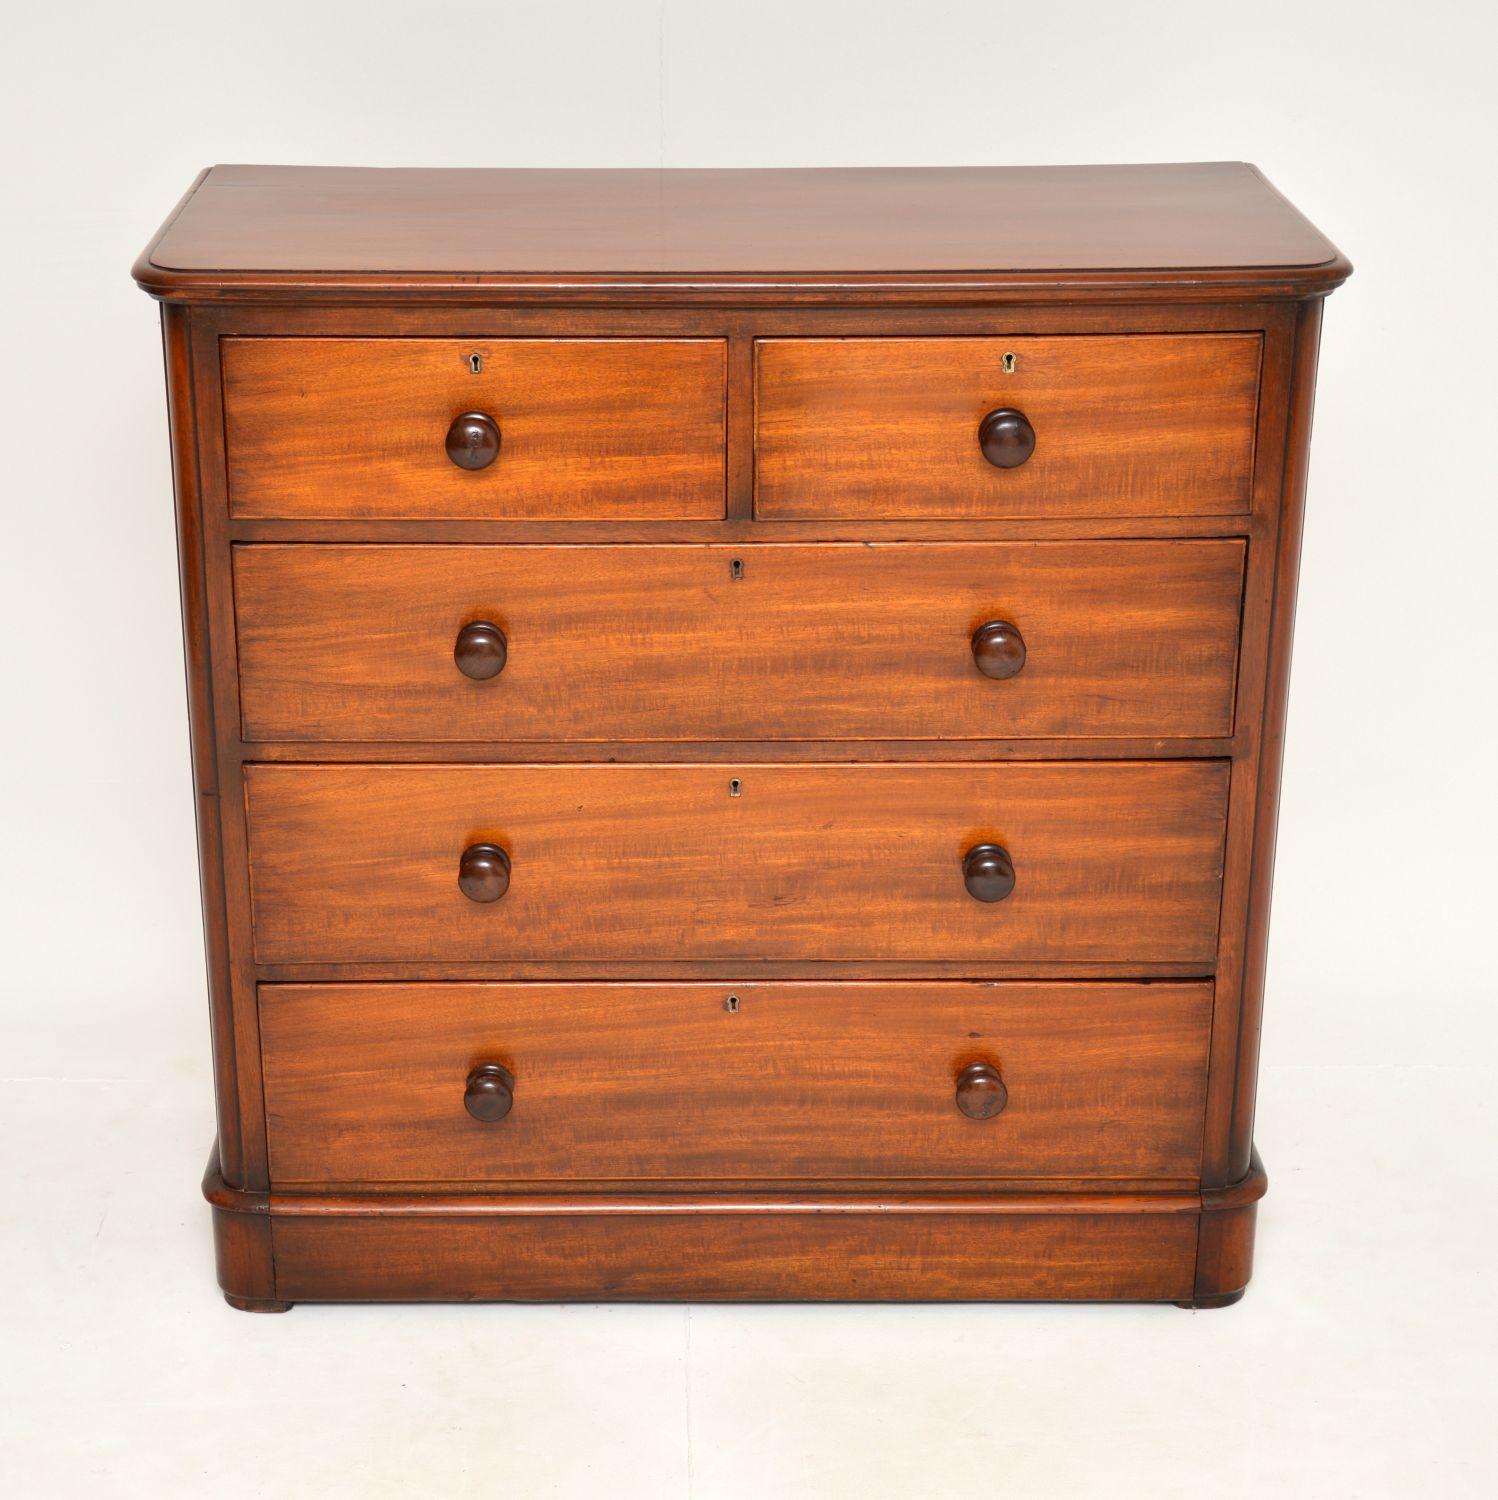 An excellent antique Victorian chest of drawers, dating from around the 1860-1880 period.

This is of fantastic quality, it very well built and has lots of storage space. The lower drawer is built into the plinth base, so is extra deep. This has